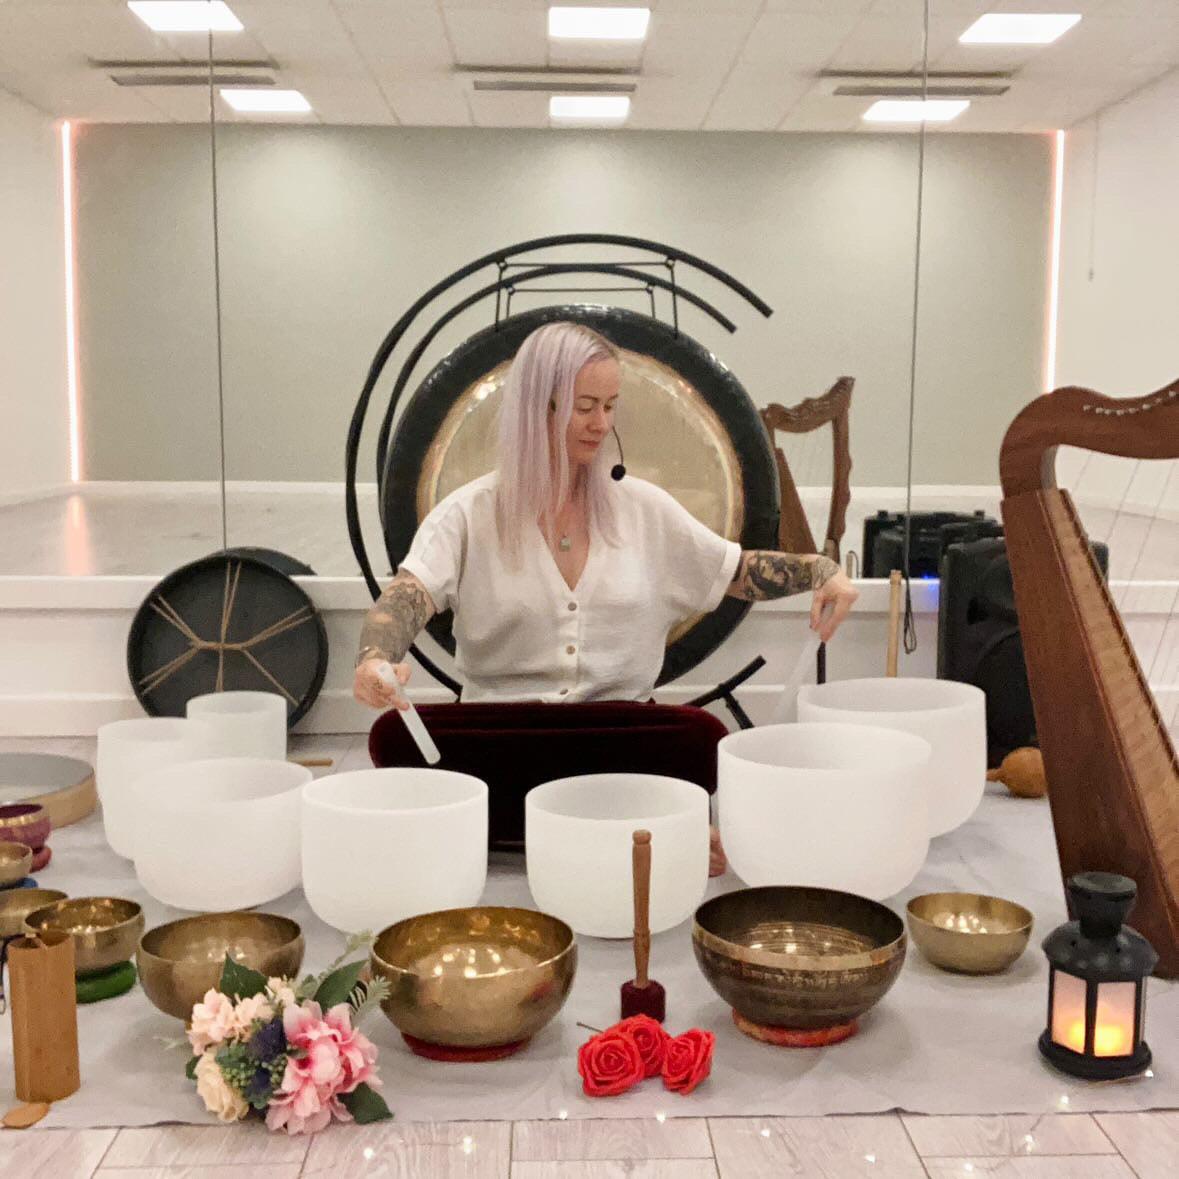 18th August @ 5pm - 6:30pm Becky @ Grounded Peace - Deep Healing Sound Bath @ Crystals By Astraea B91 3BH - Crystals By Astraea